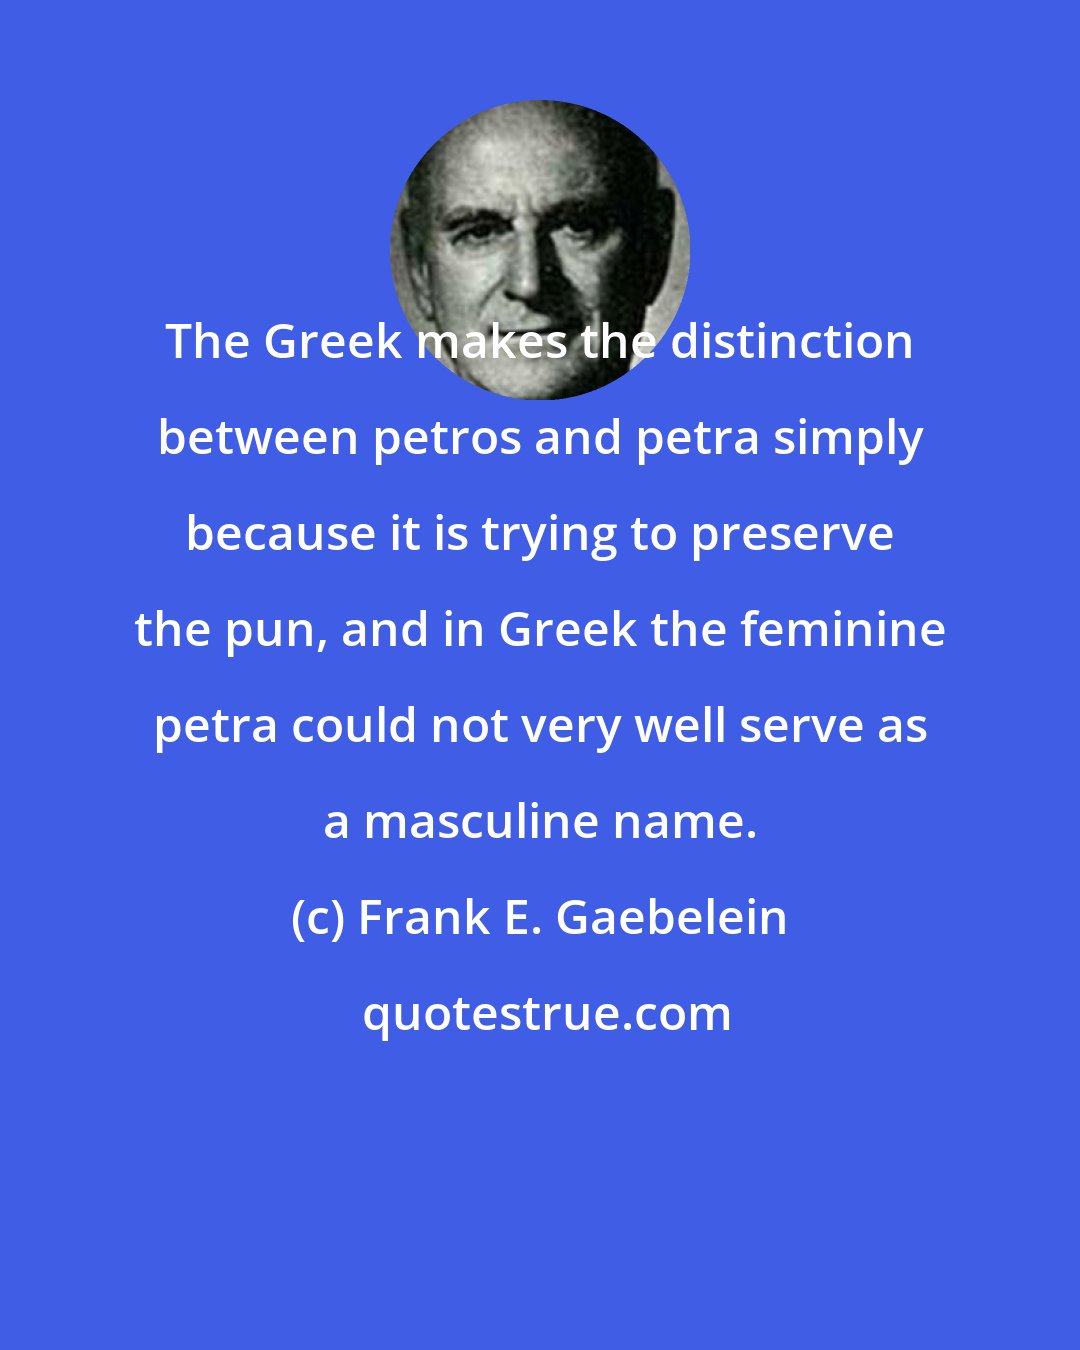 Frank E. Gaebelein: The Greek makes the distinction between petros and petra simply because it is trying to preserve the pun, and in Greek the feminine petra could not very well serve as a masculine name.